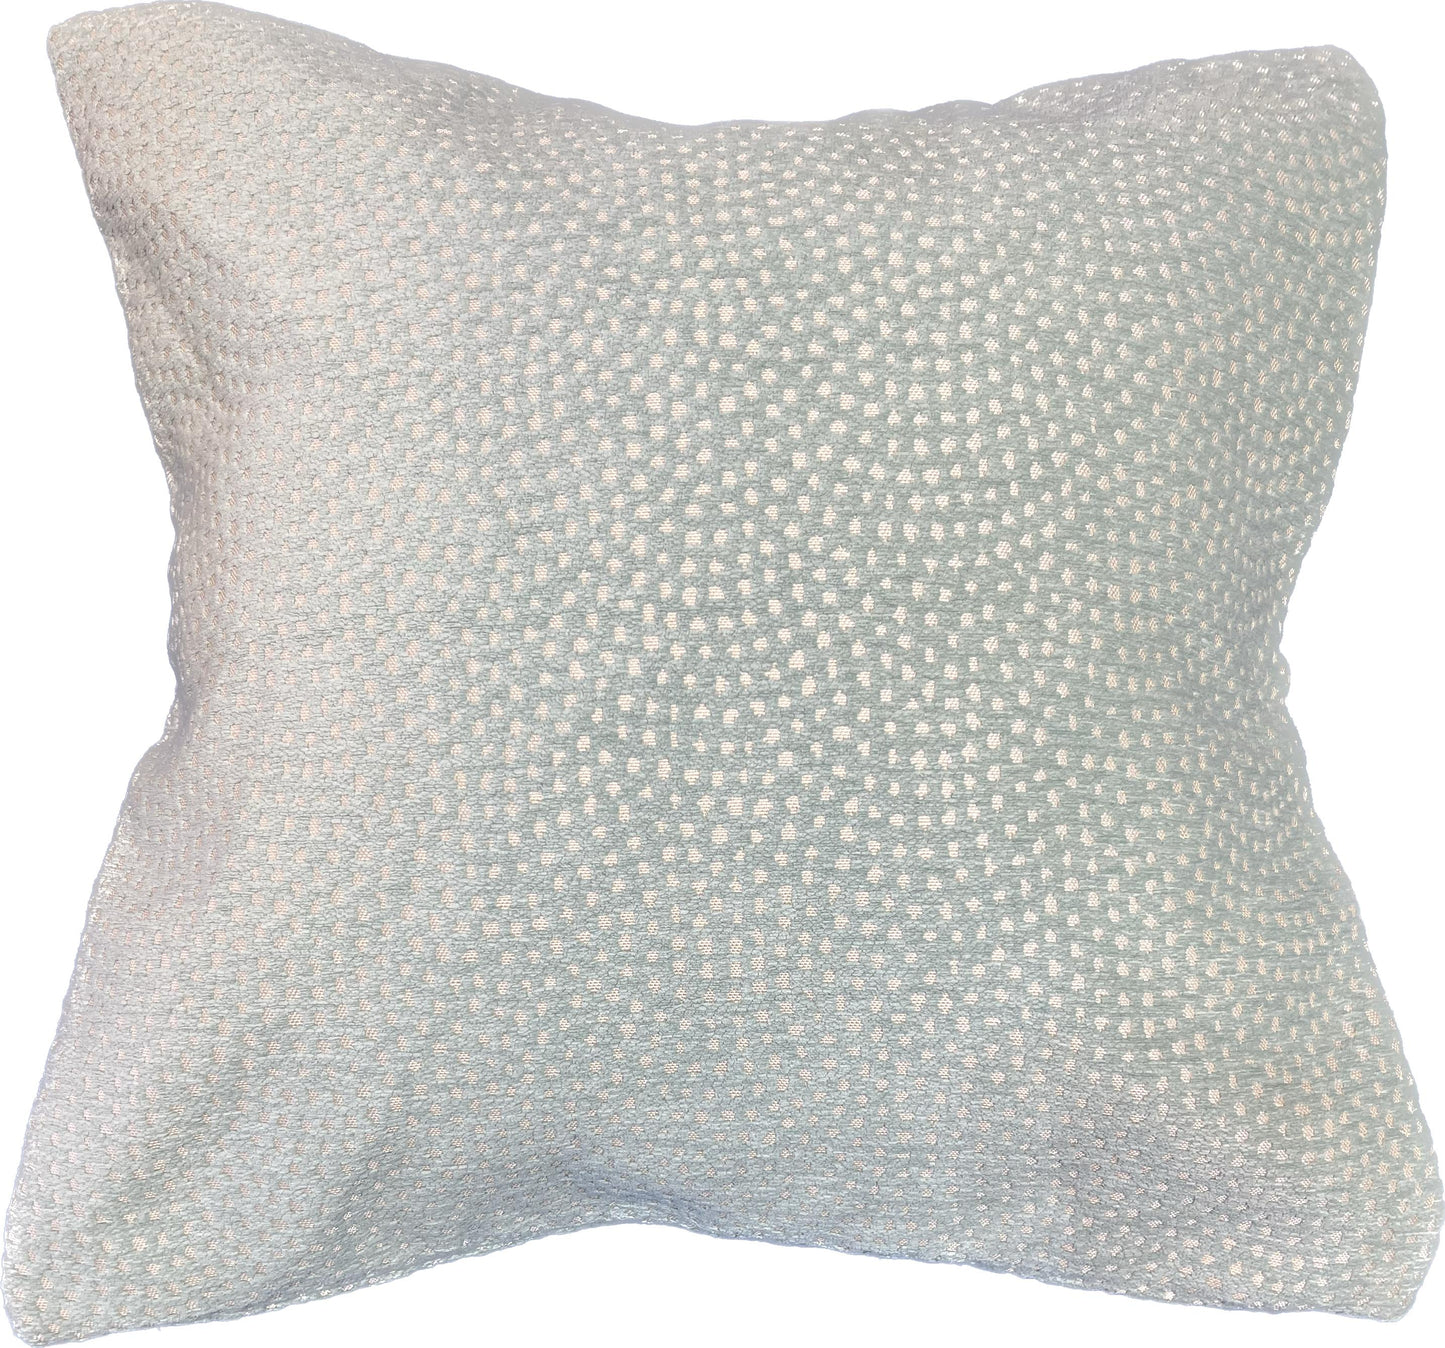 18"x18"  Dots Pillow Cover